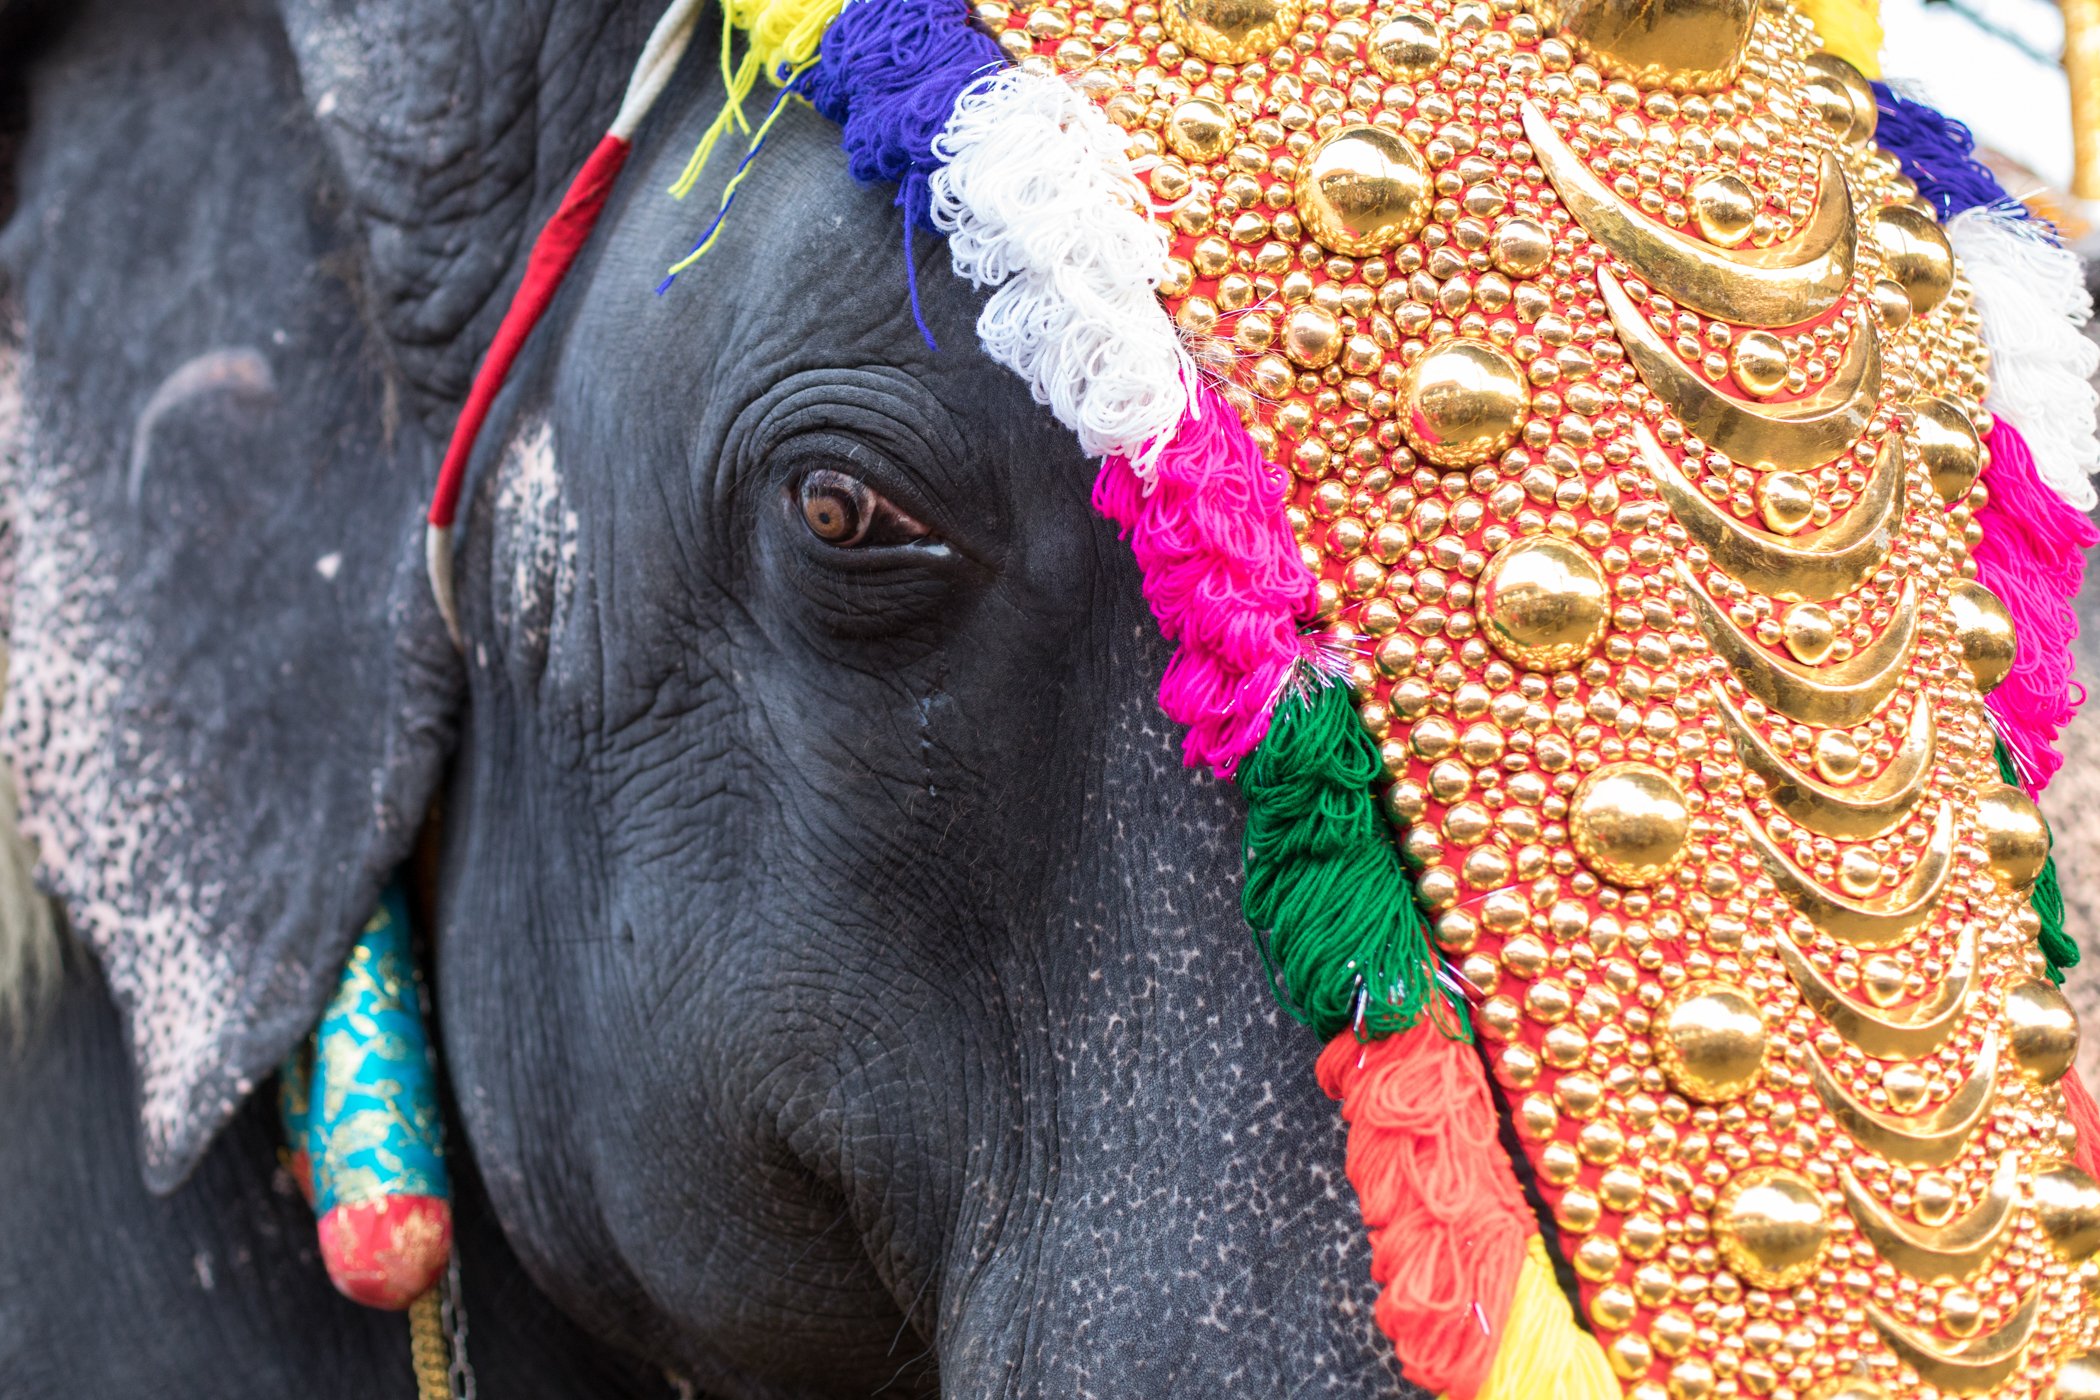 Close up headshot portrait of an Elephant at a festival in Kochi in Kerala, India.